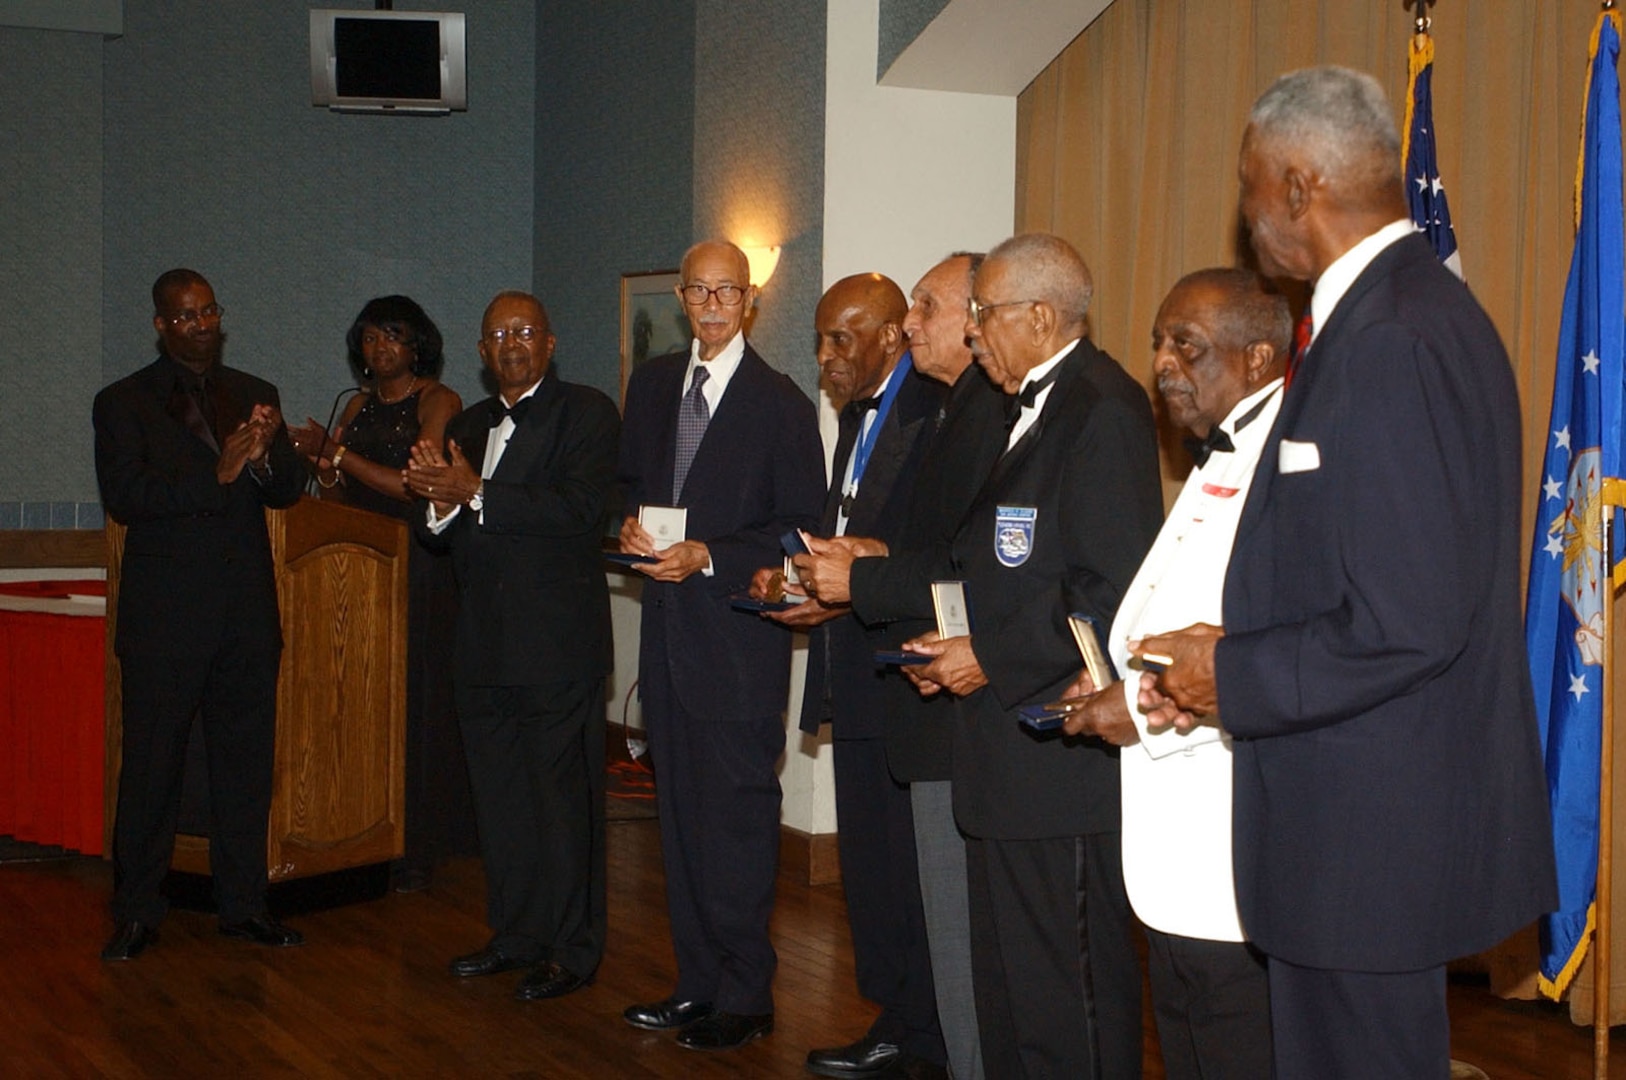 San Antonio Chapter Tuskegee Airmen Inc. members (left) applaud local Tuskegee Airmen (from left to right) Matthew Plummer, Dr. Granville Coggs, Dr. Eugene Derricotte, Warren Eusan, William Gray and John Miles after presenting them with  bronze replicas of the Congressional Gold Medal that was presented to all Tuskegee Airmen earlier this year in recognition of their service and sacrifice to the United States during World War II. The presentation was part of the local chapter's 16th Annual Education Assistance Awards Banquet held June 9. (U.S. Air Force photo by Staff Sgt. Lindsey Maurice)
                   